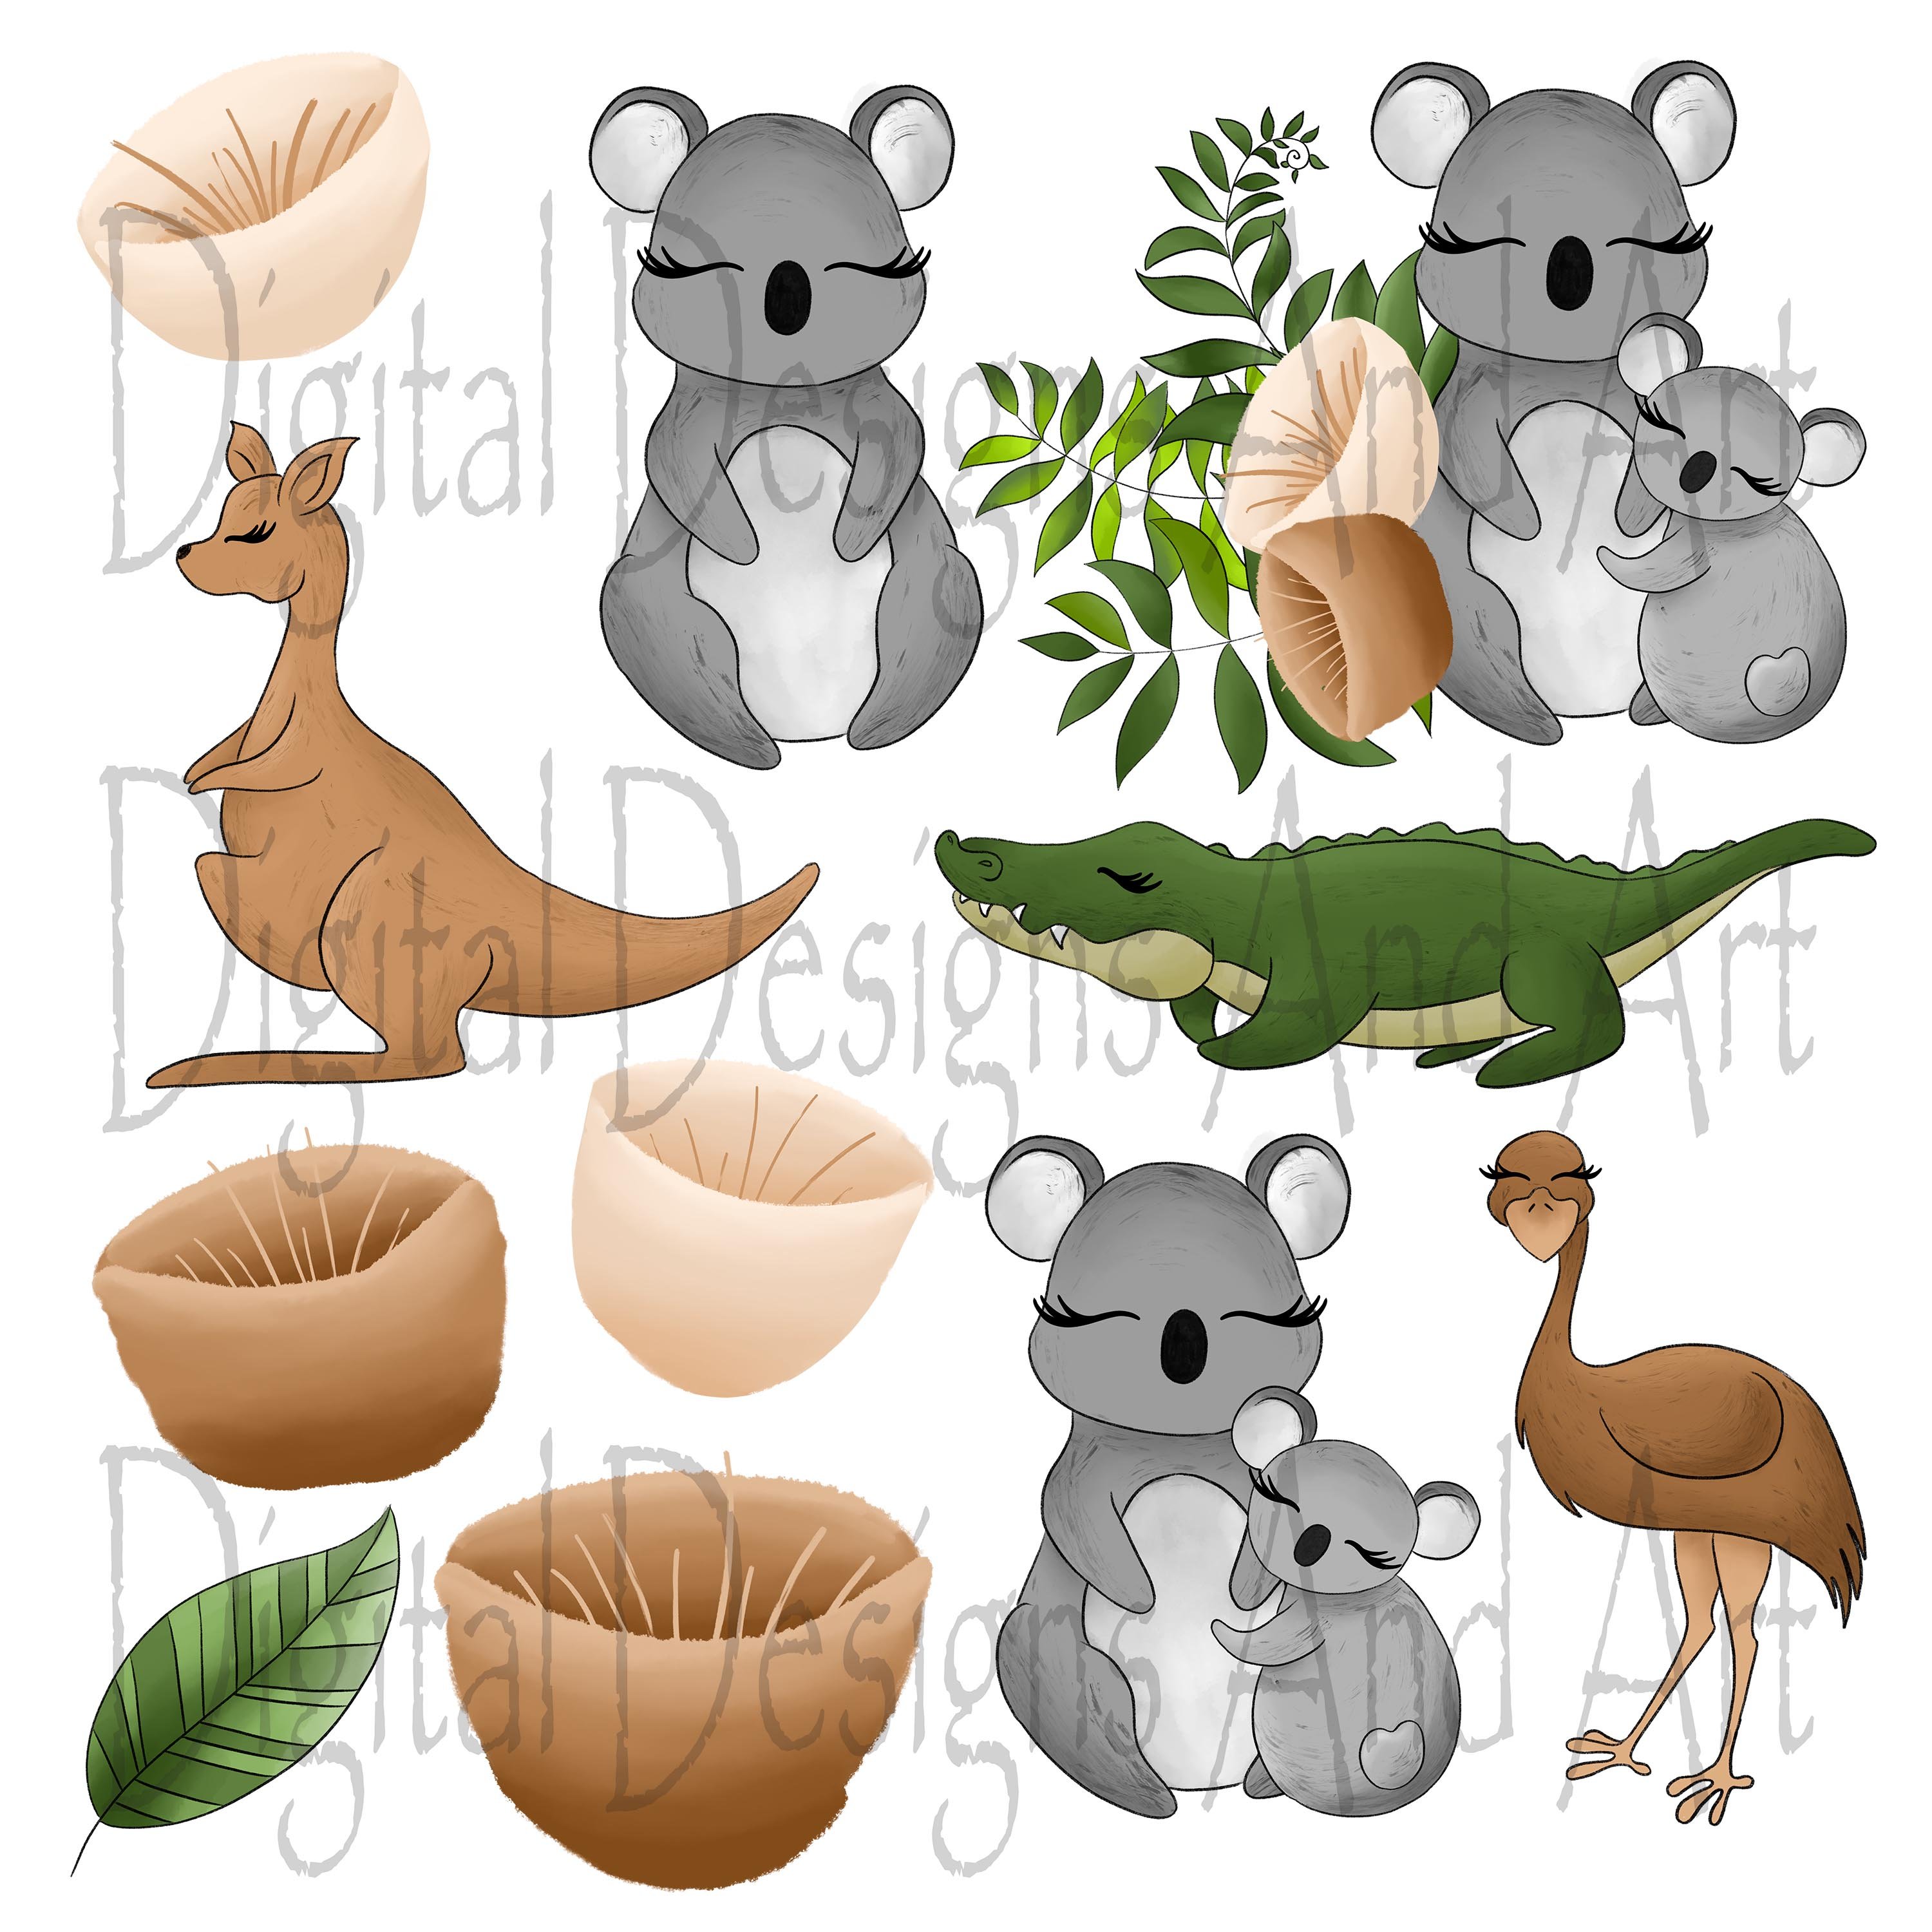 Some separate elements for creating a full animals composition.